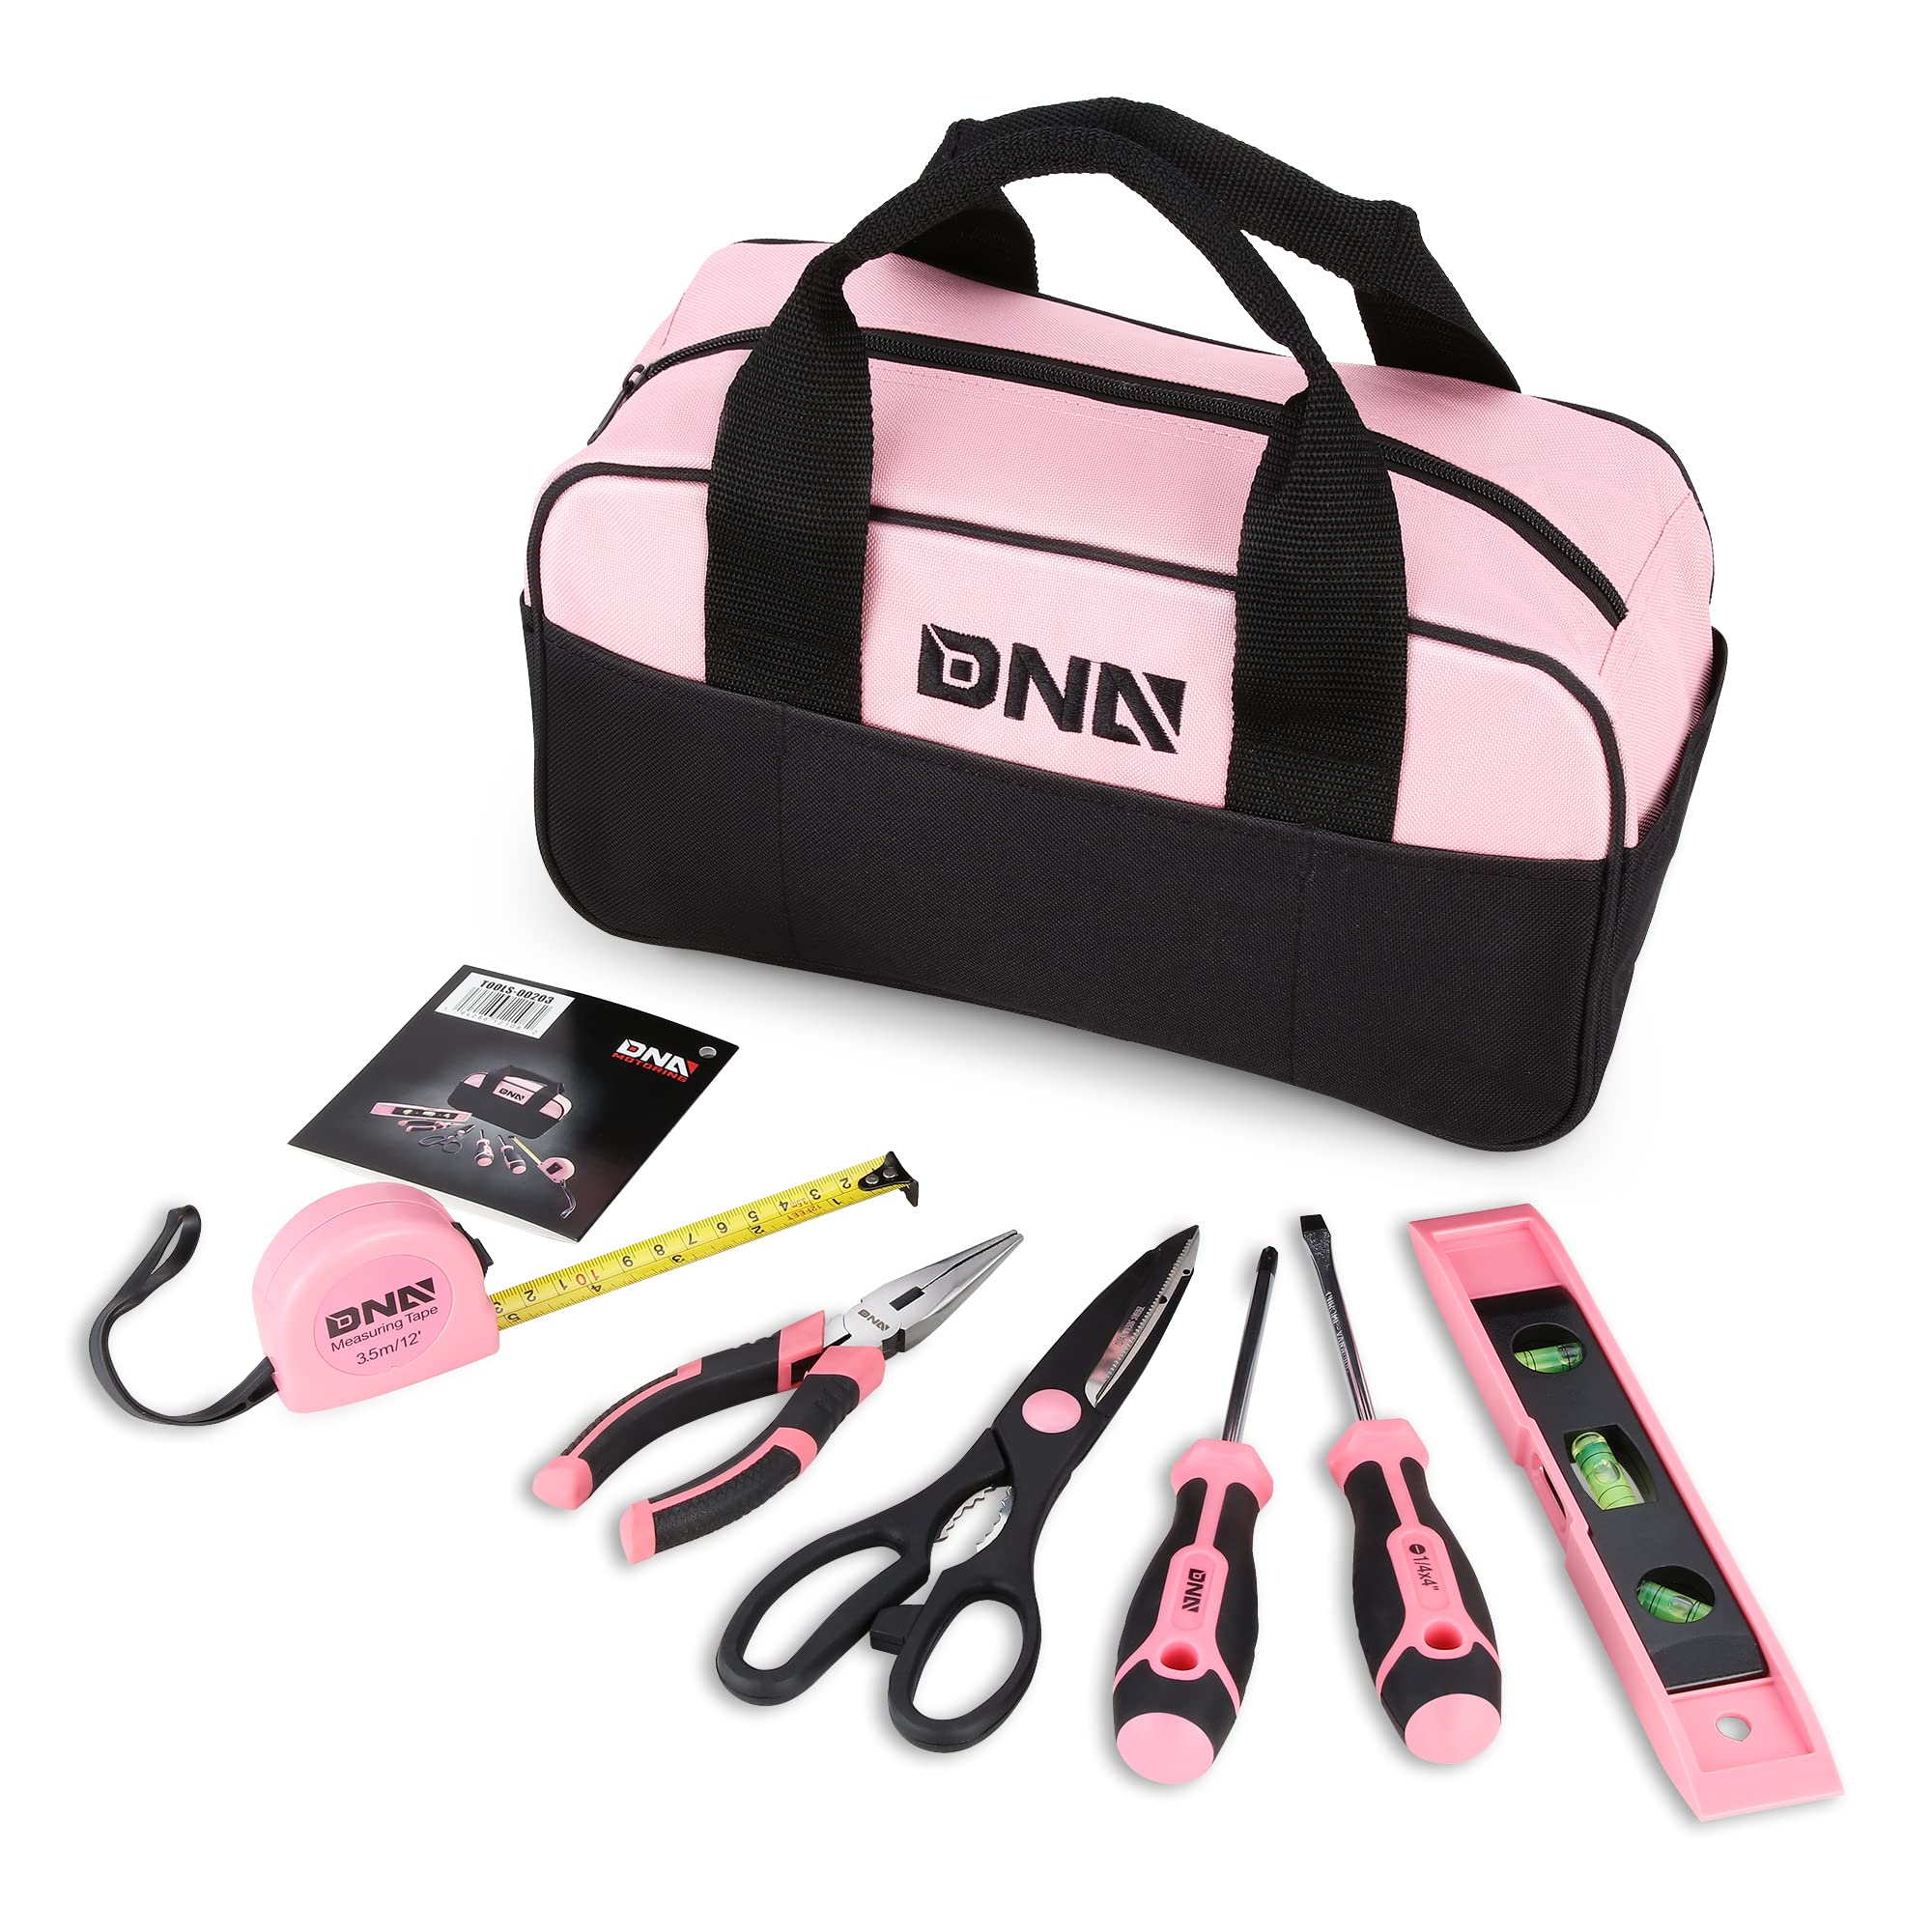 ‎DNA MOTORING TOOLS-00203 Home Repairing Tool Set - 7 Pcs Household DIY Hand Tool Kit with Wide-open Mouth Canvas Storage Bag, Pink